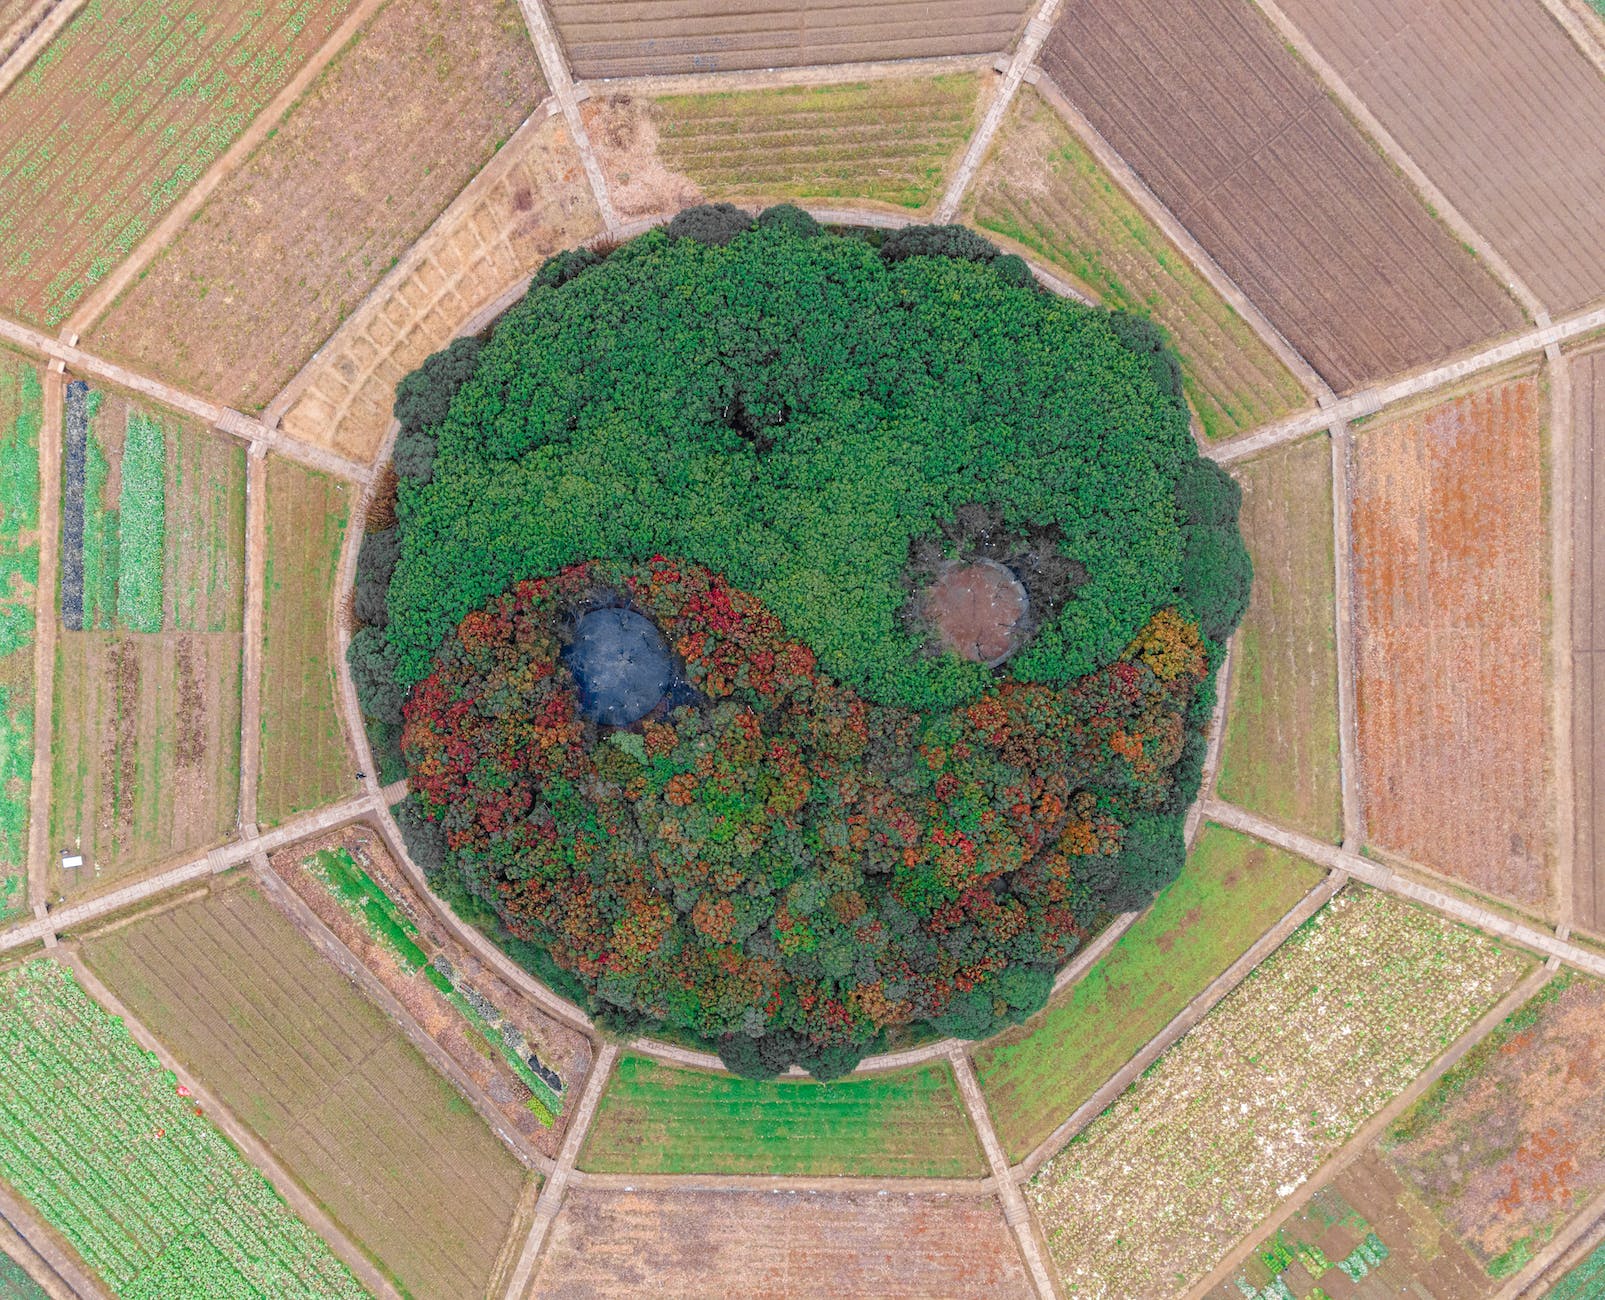 drone shot of a round ying yang garden in the centre of croplands
Photo by 岳 趙 on Pexels.com